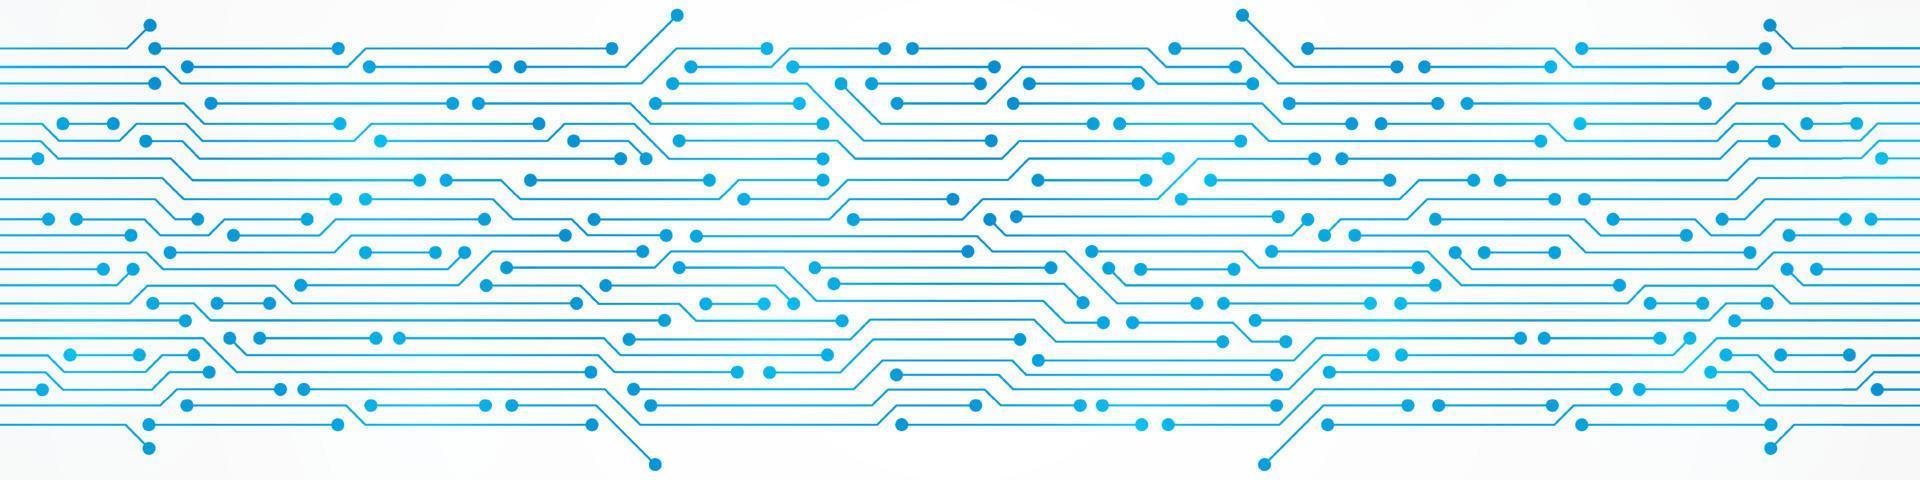 Abstract Technology Background, circuit board pattern, microchip, power line vector